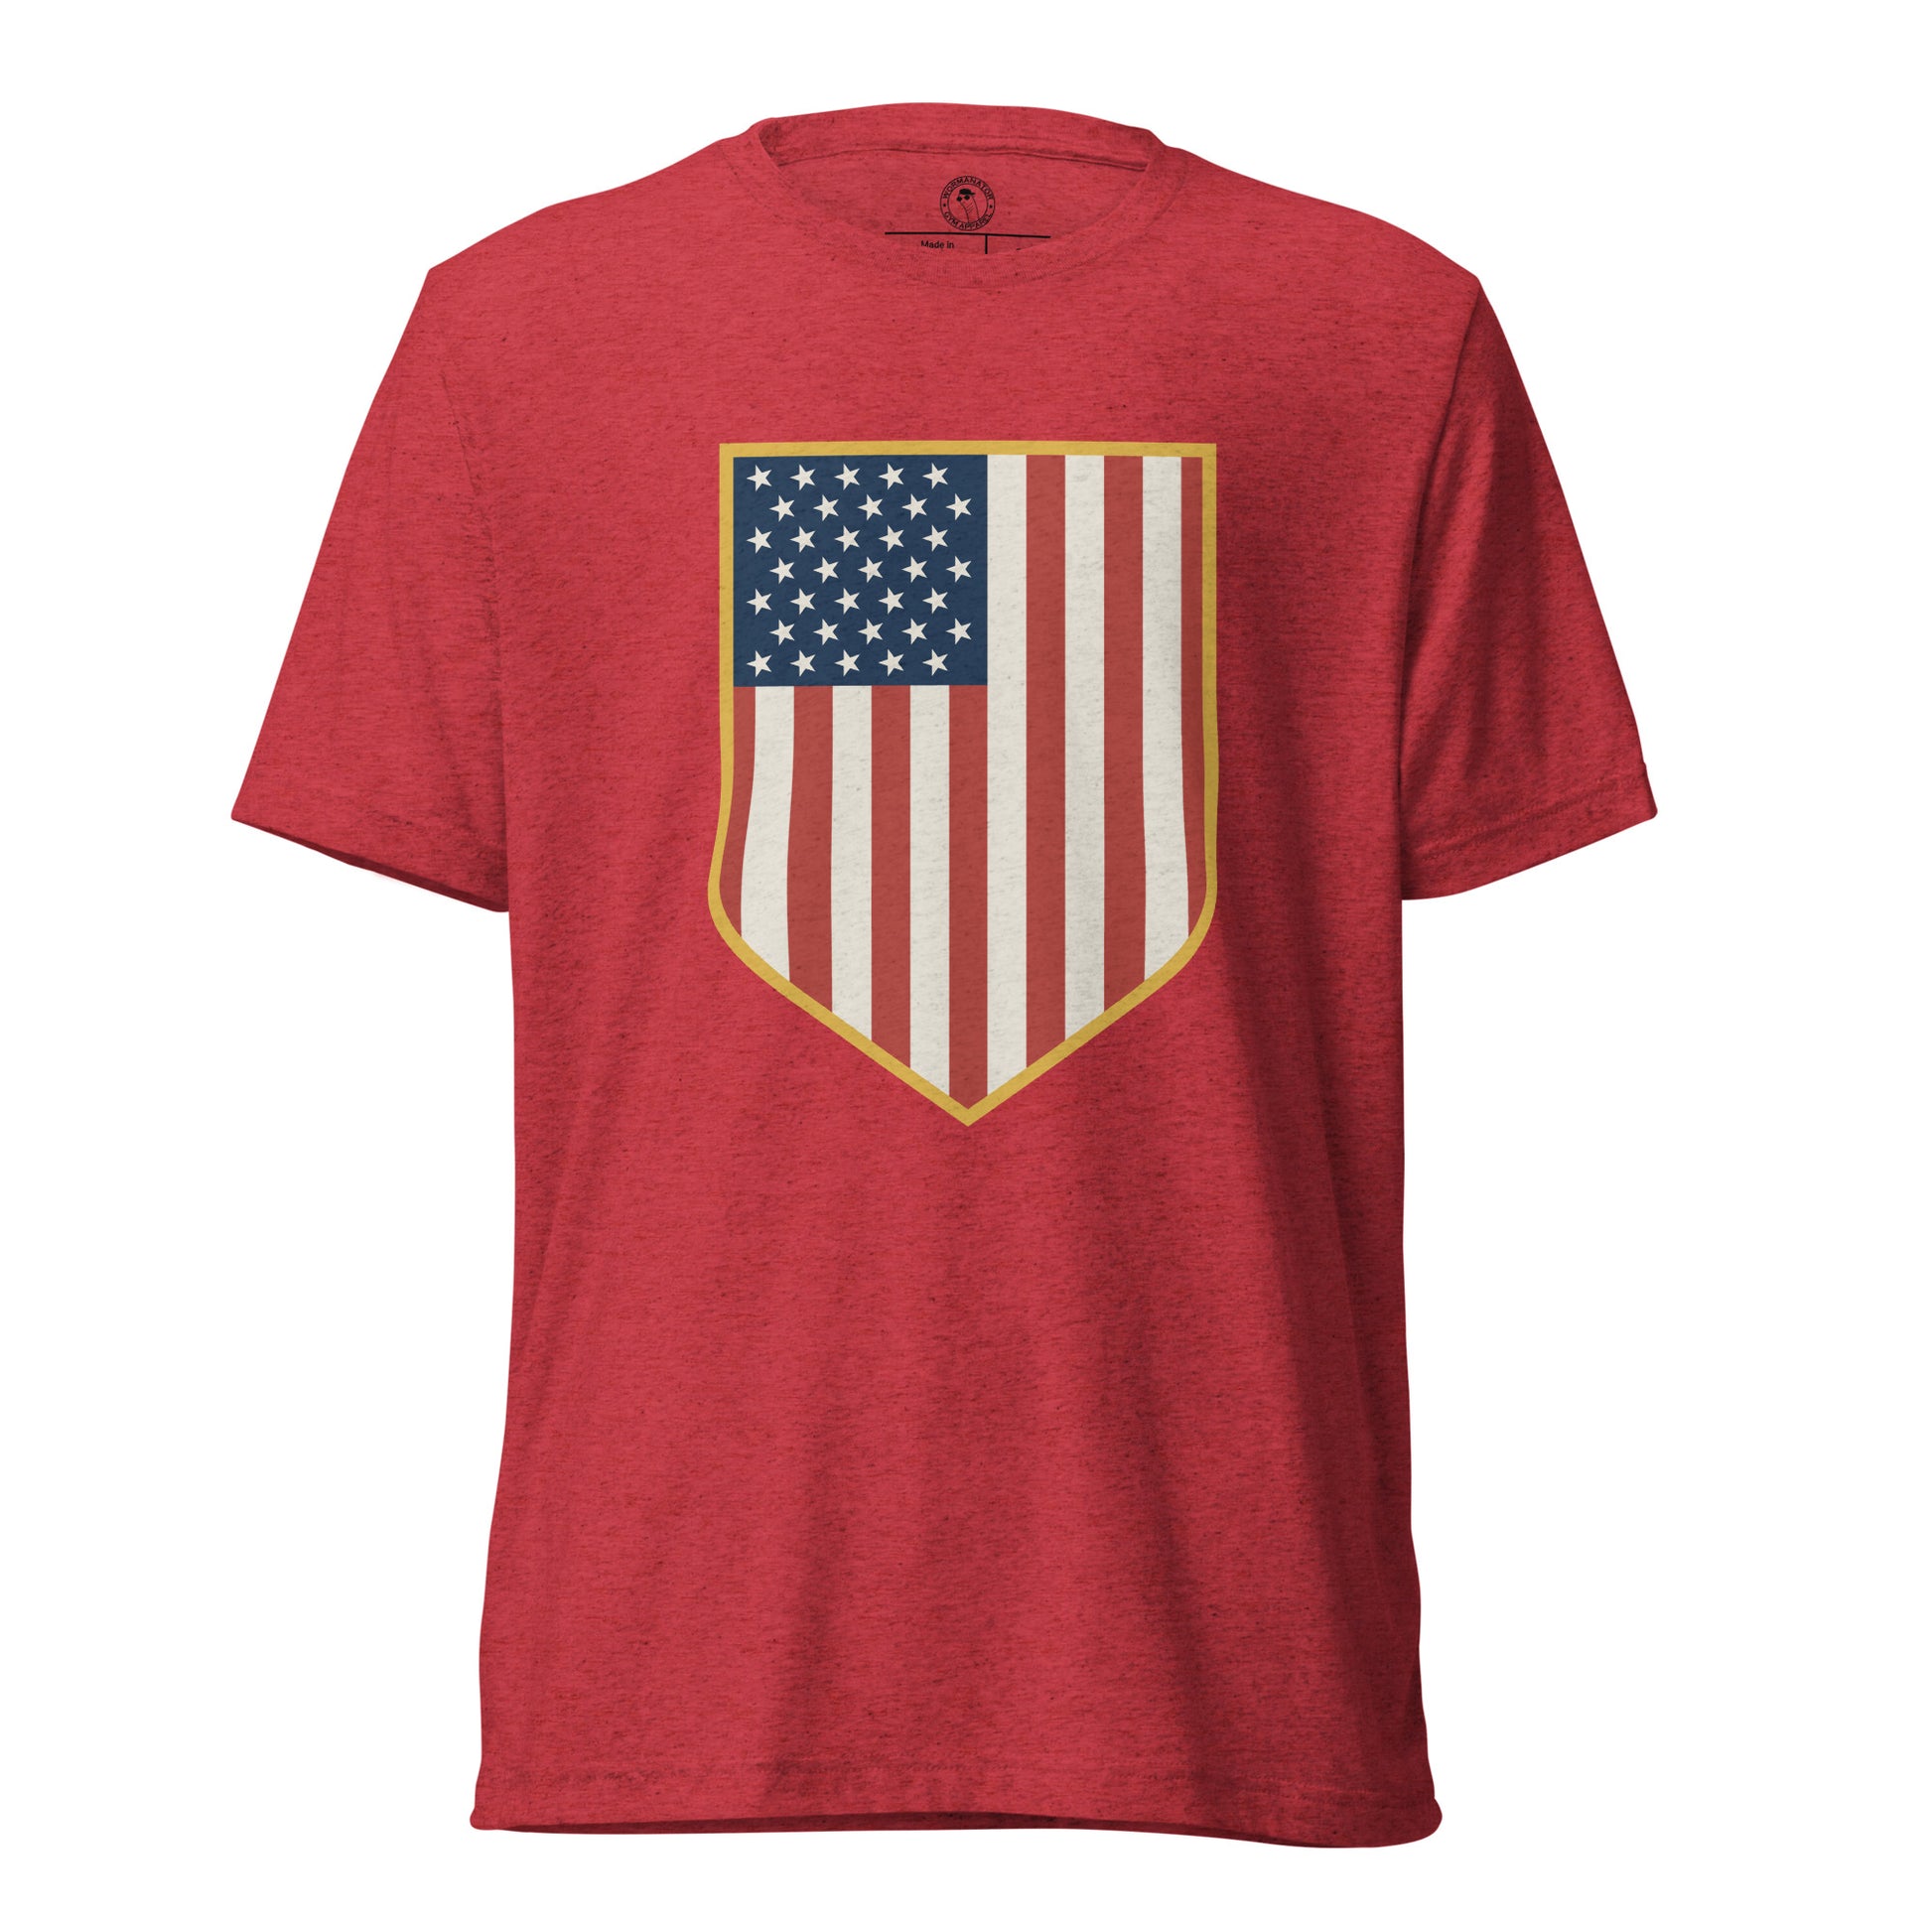 General Patton Shirt in Red Triblend